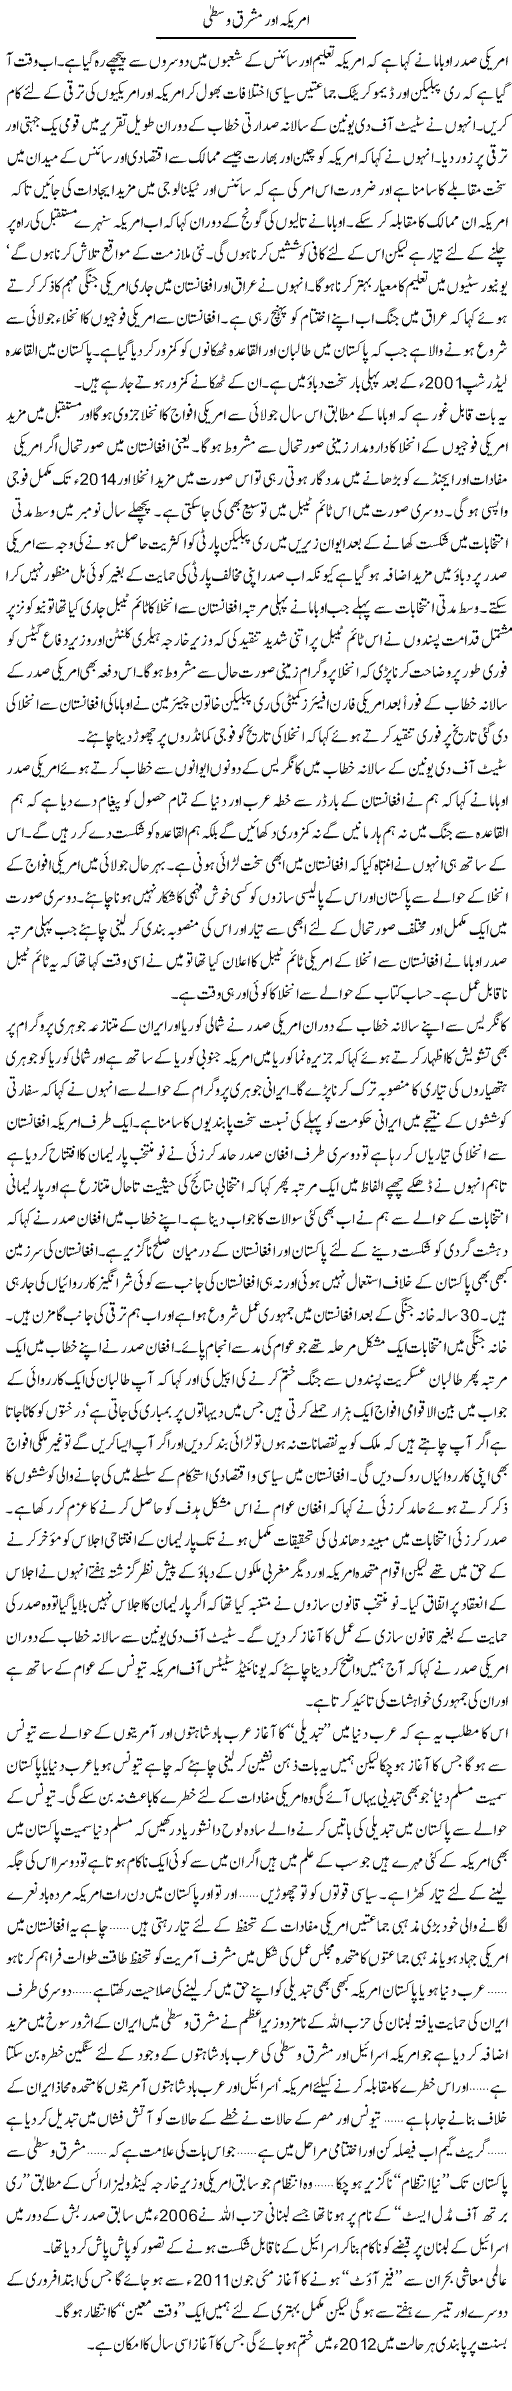 America and Middle East Express Column Zamrad Naqvi 31 January 2011